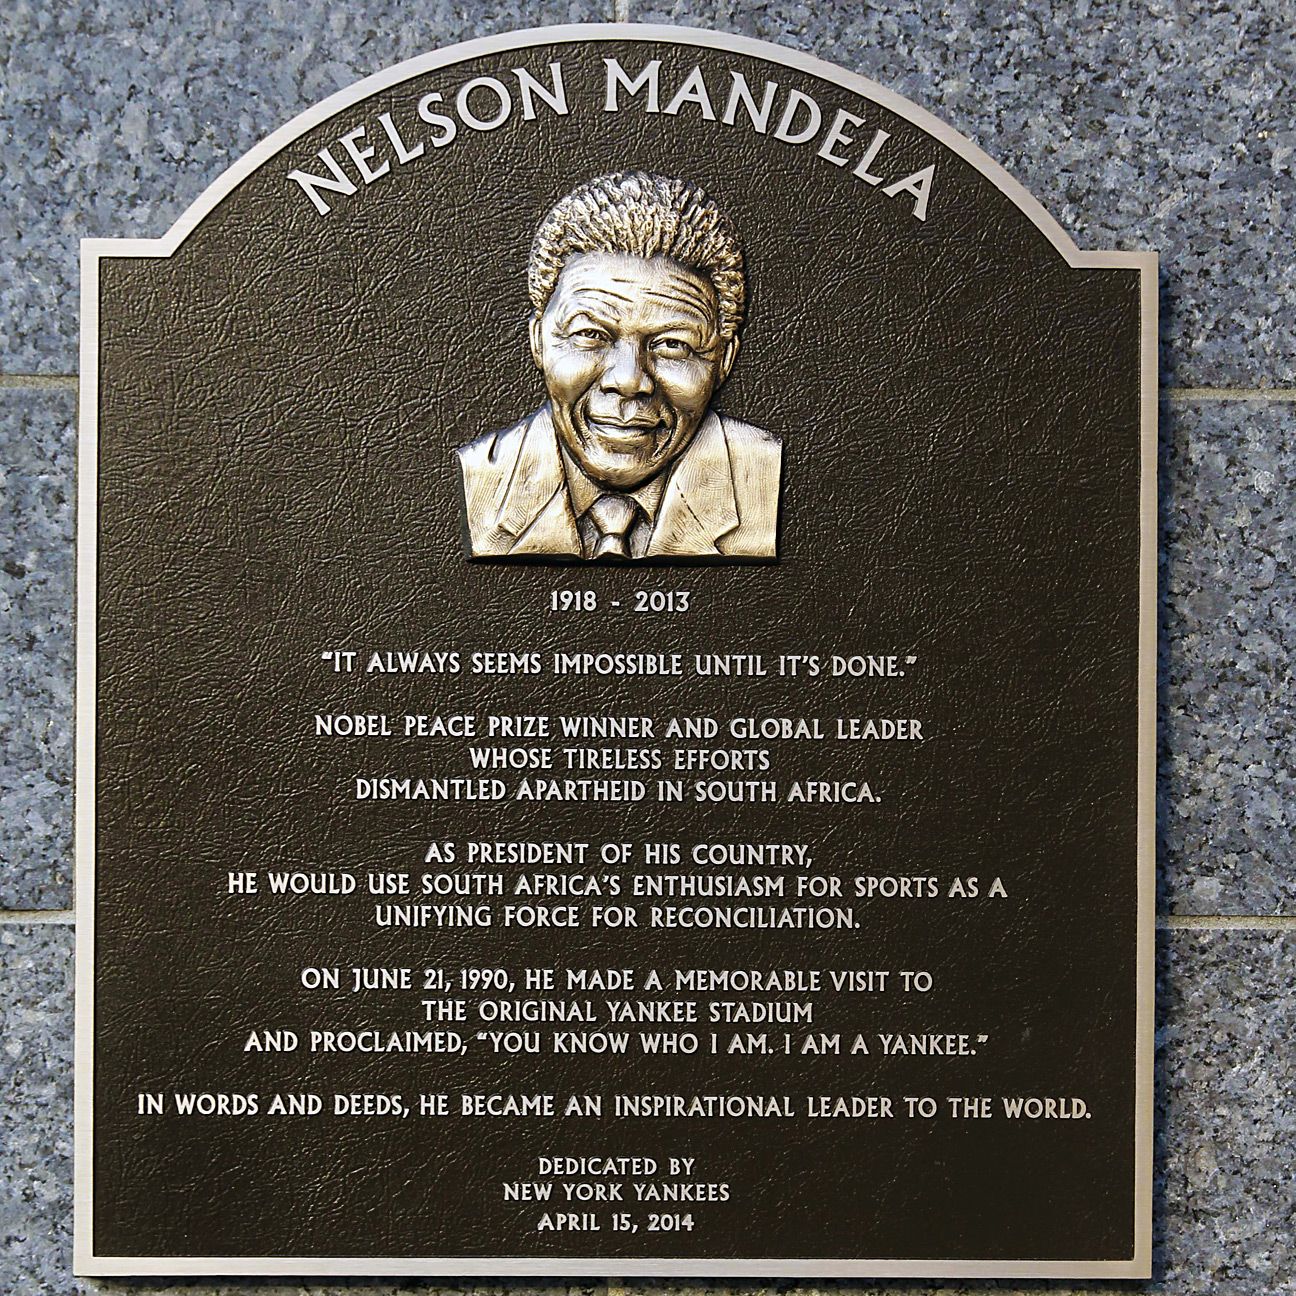 New York Yankees unveil plaque for Nelson Mandela in Monument Park